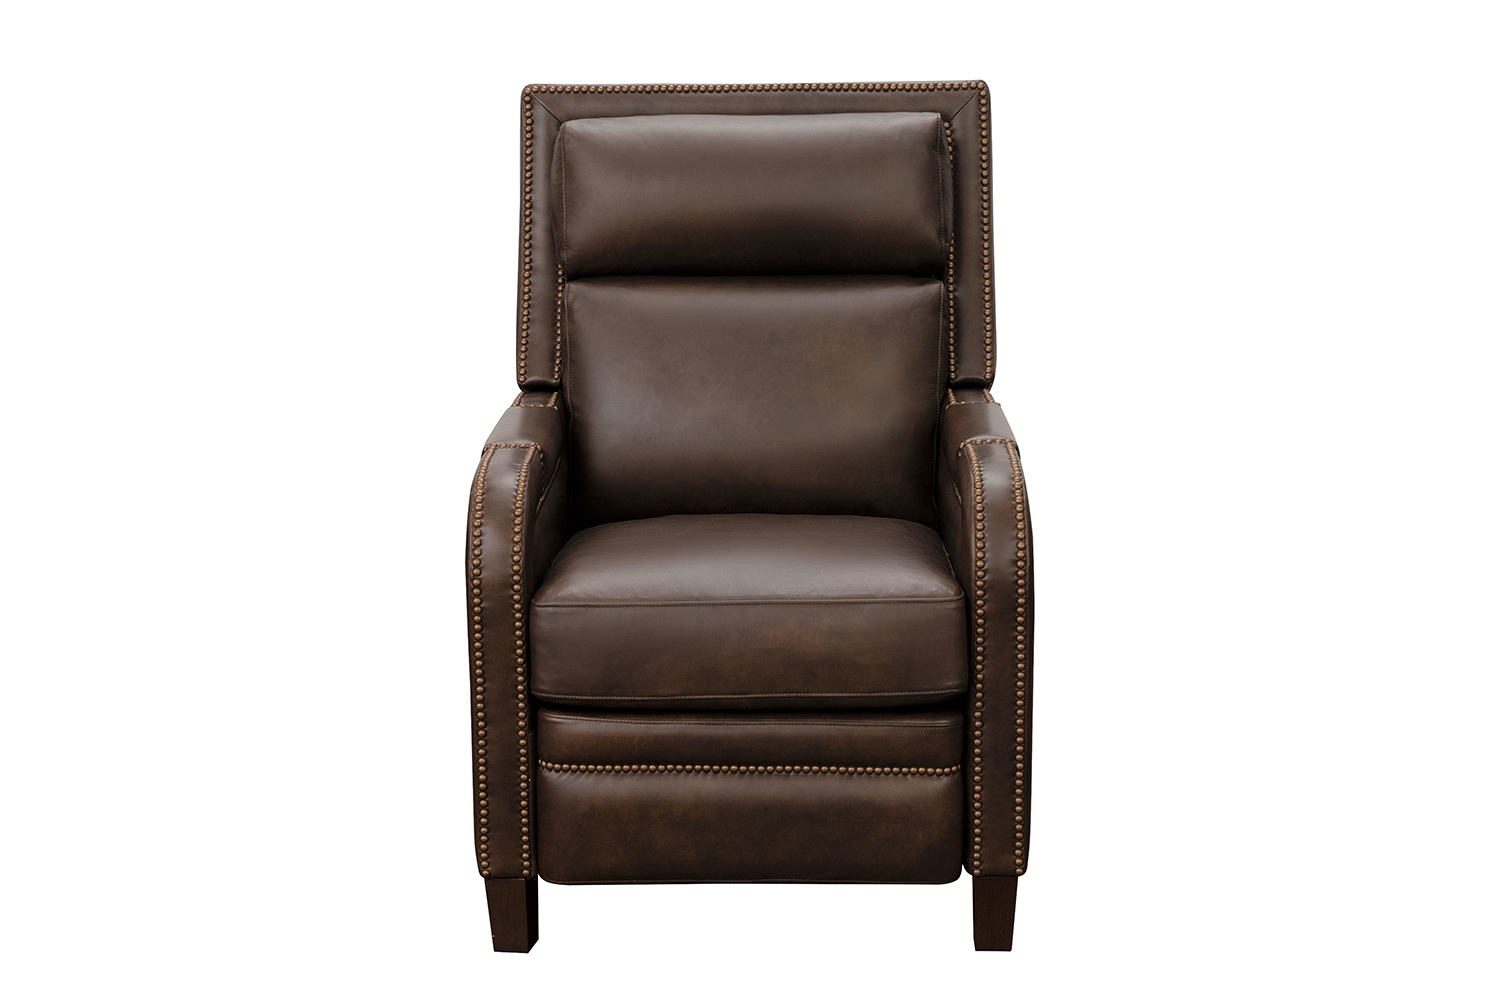 Barcalounger Cambridge Voice Activated Power Recliner Chair with Power Head Rest - Ashford Walnut/All Leather